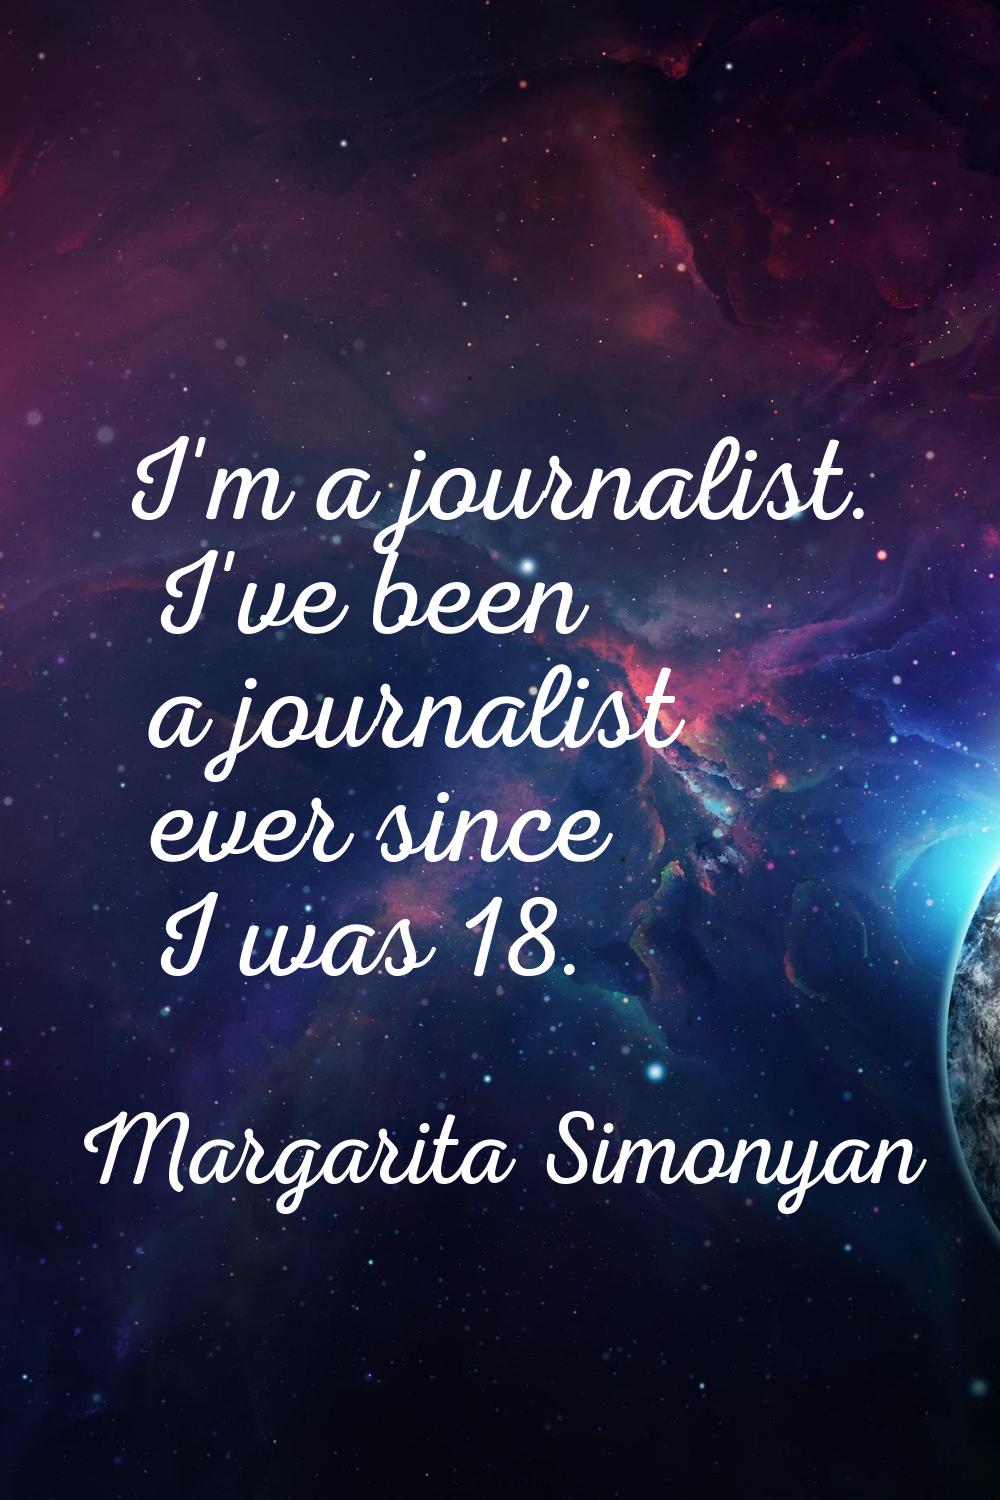 I'm a journalist. I've been a journalist ever since I was 18.